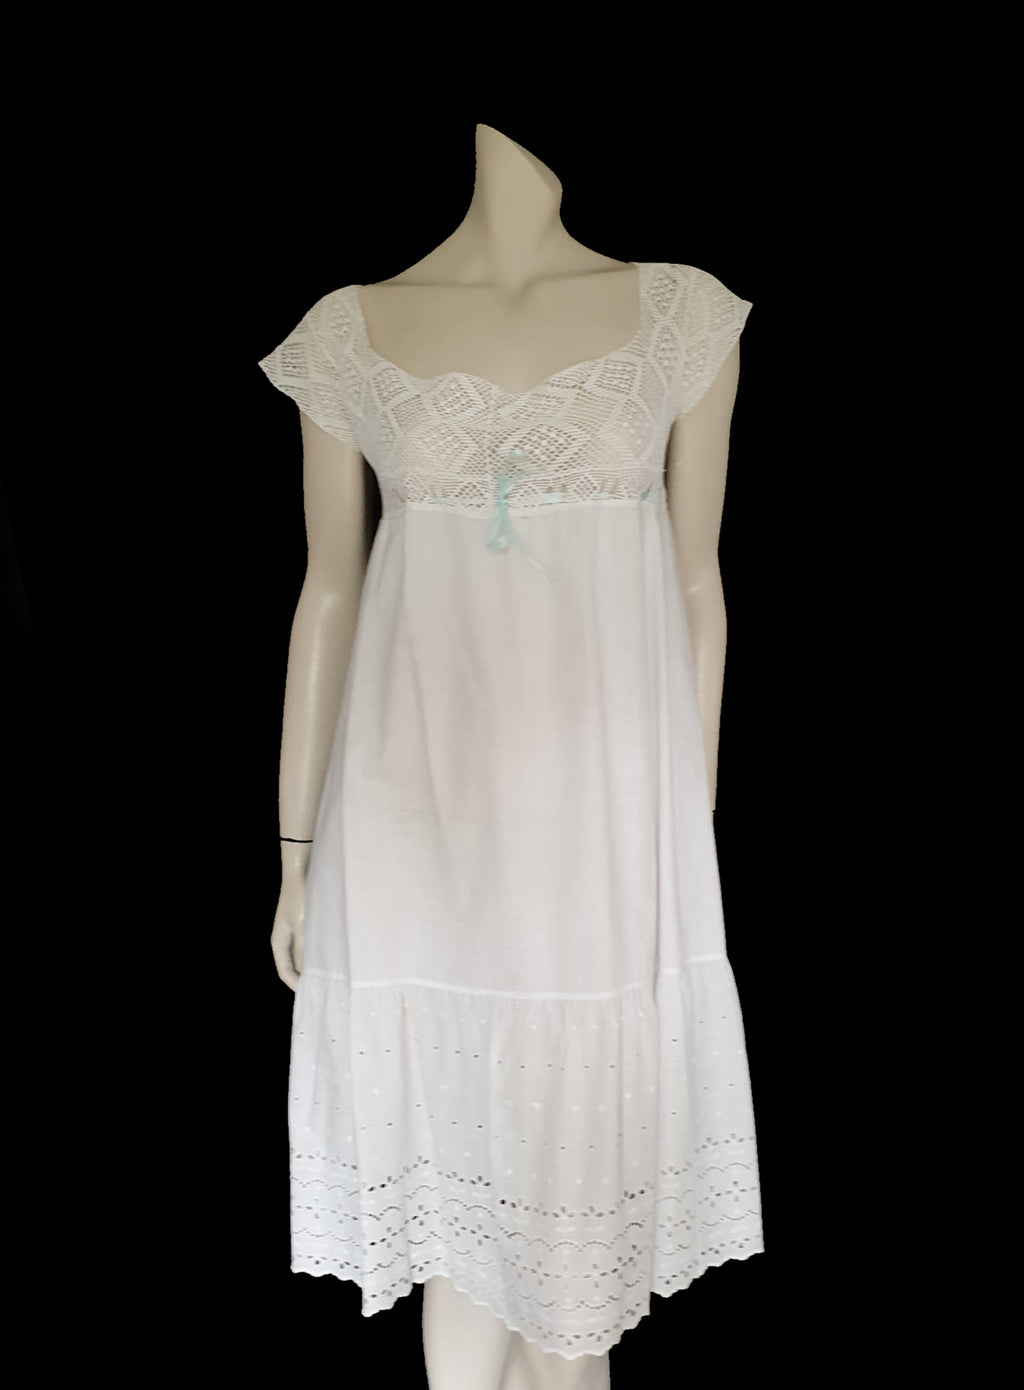 Antique 1920s white petticoat dress with crochet top or yoke and broderie anglaise eyelet ruffle Small